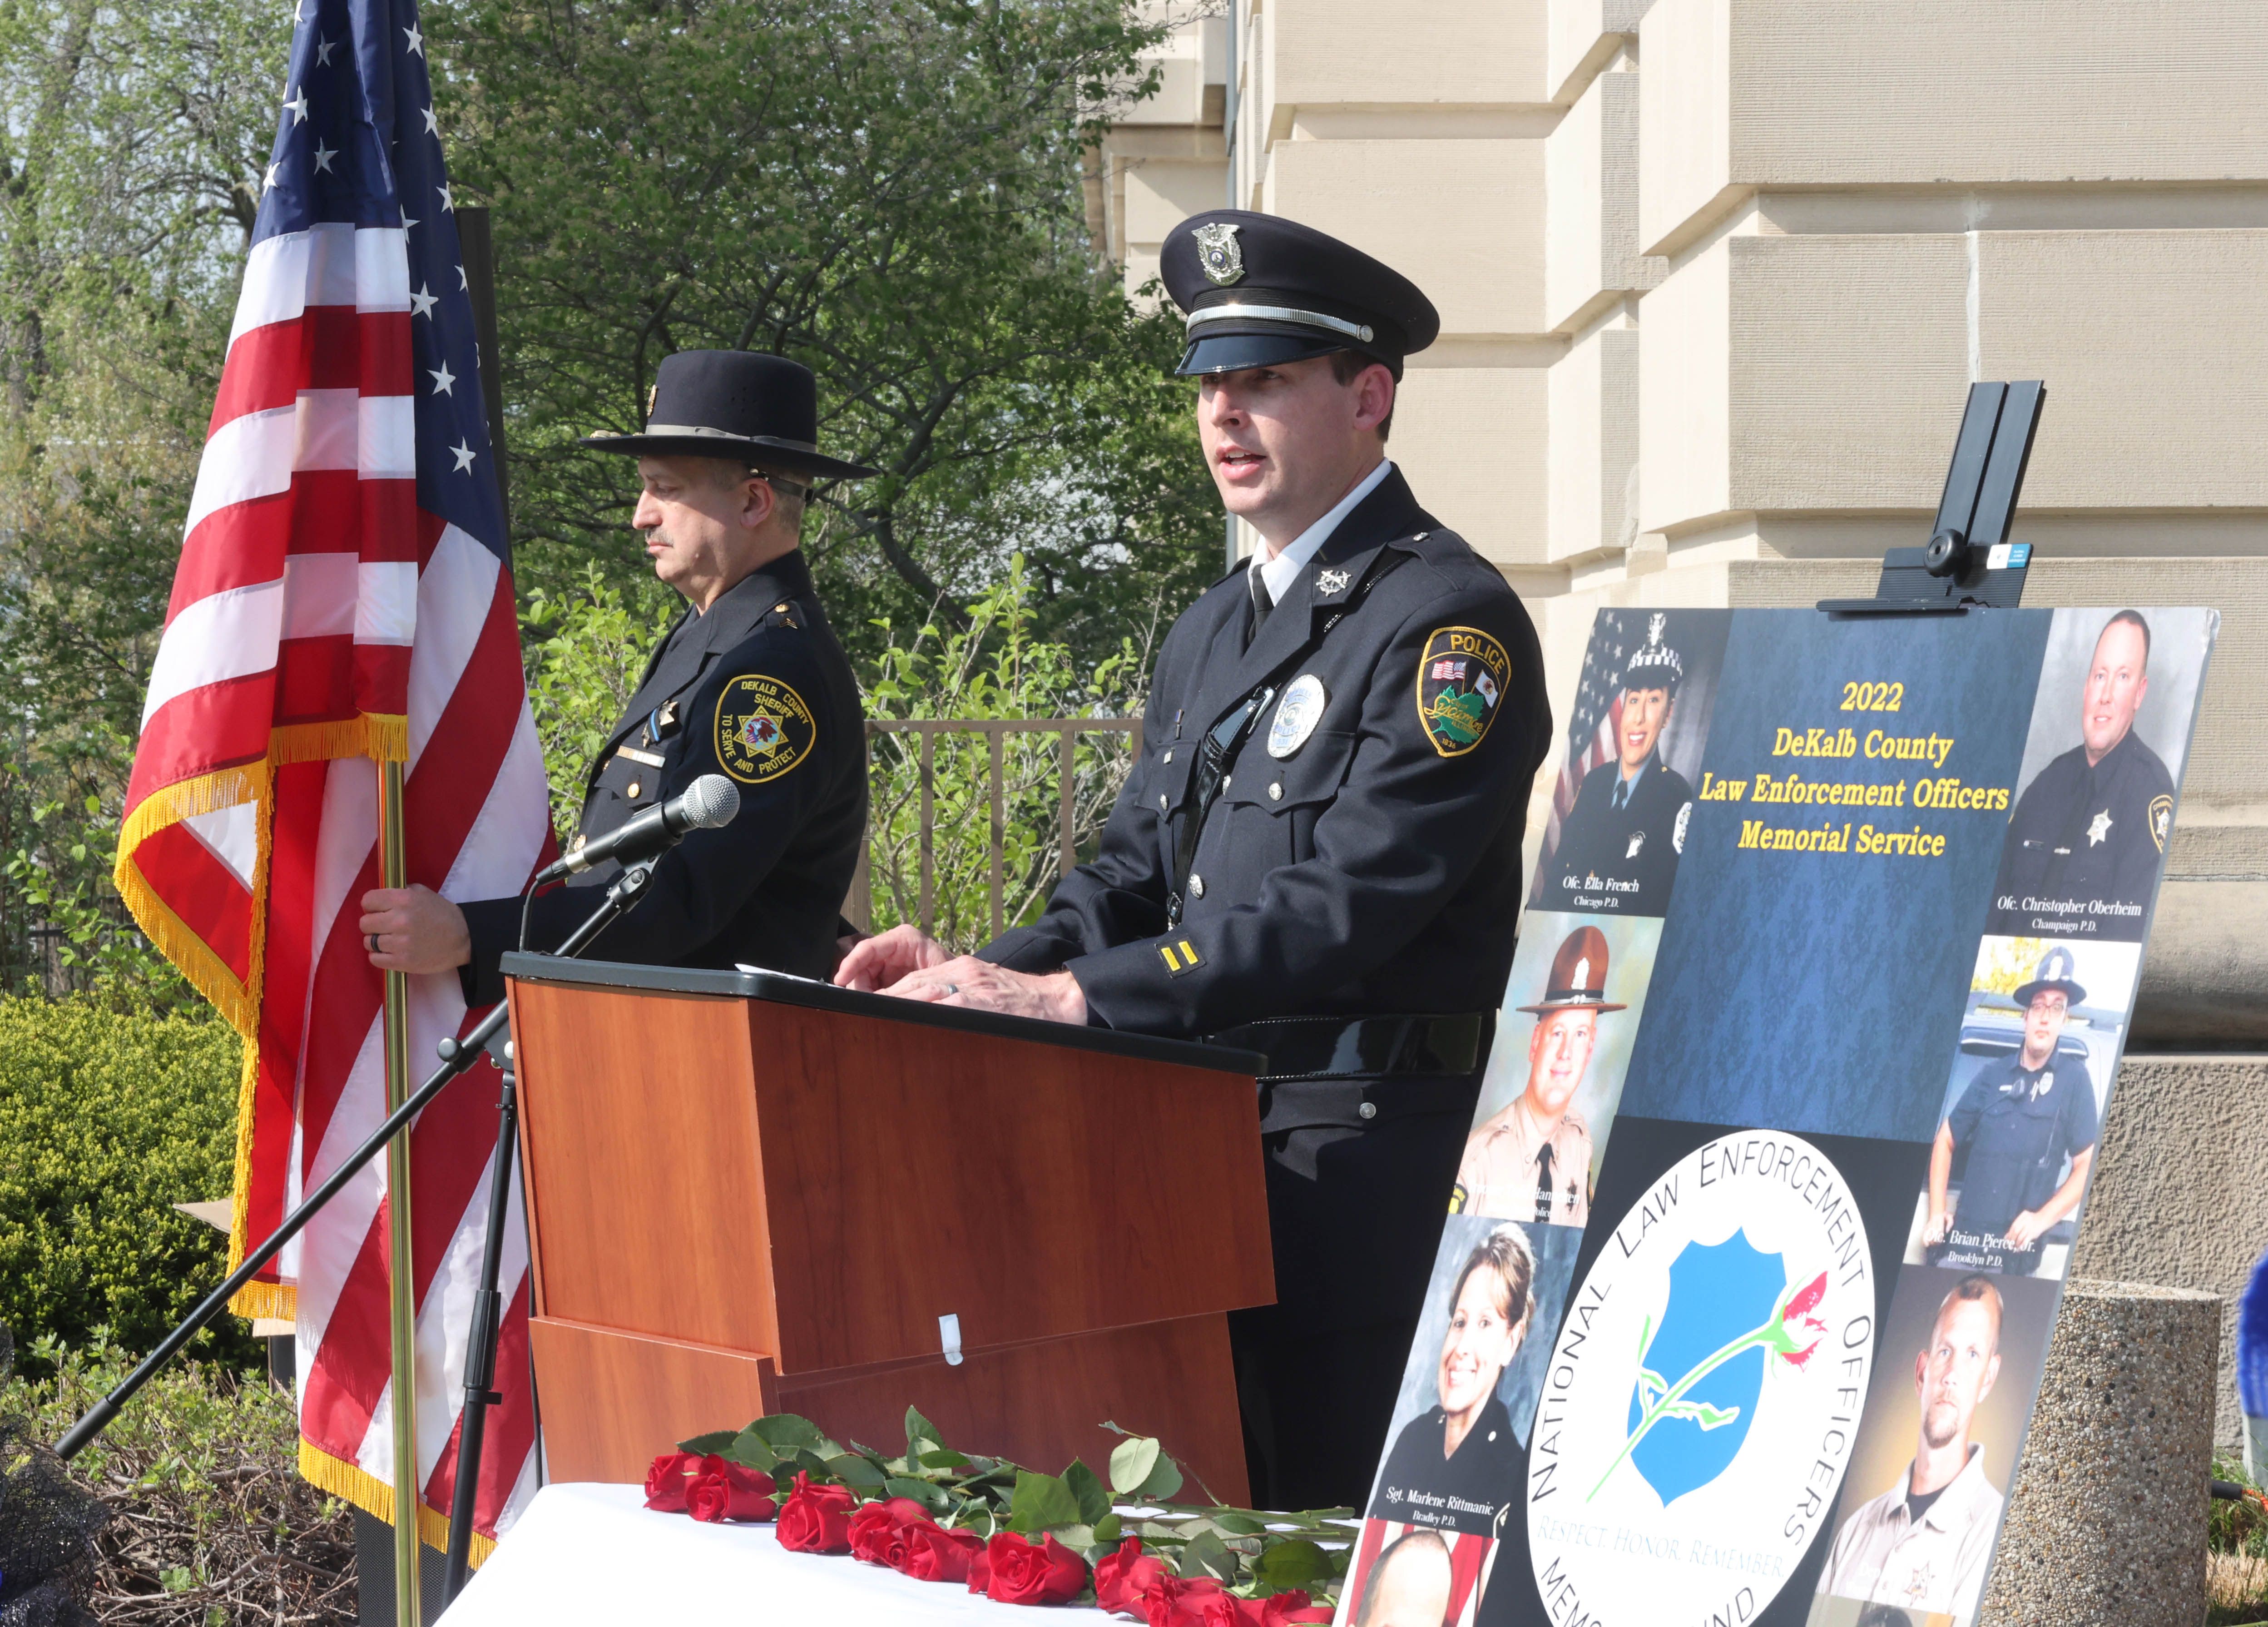 Sycamore Police Detective Ryan Hooper speaks as honor guard member DeKalb County Sheriff Sergeant Tim Duda holds the flag Friday, May 13, 2022, during the DeKalb County Law Enforcement Officers' Memorial Service on the lawn of the DeKalb County Courthouse in Sycamore.